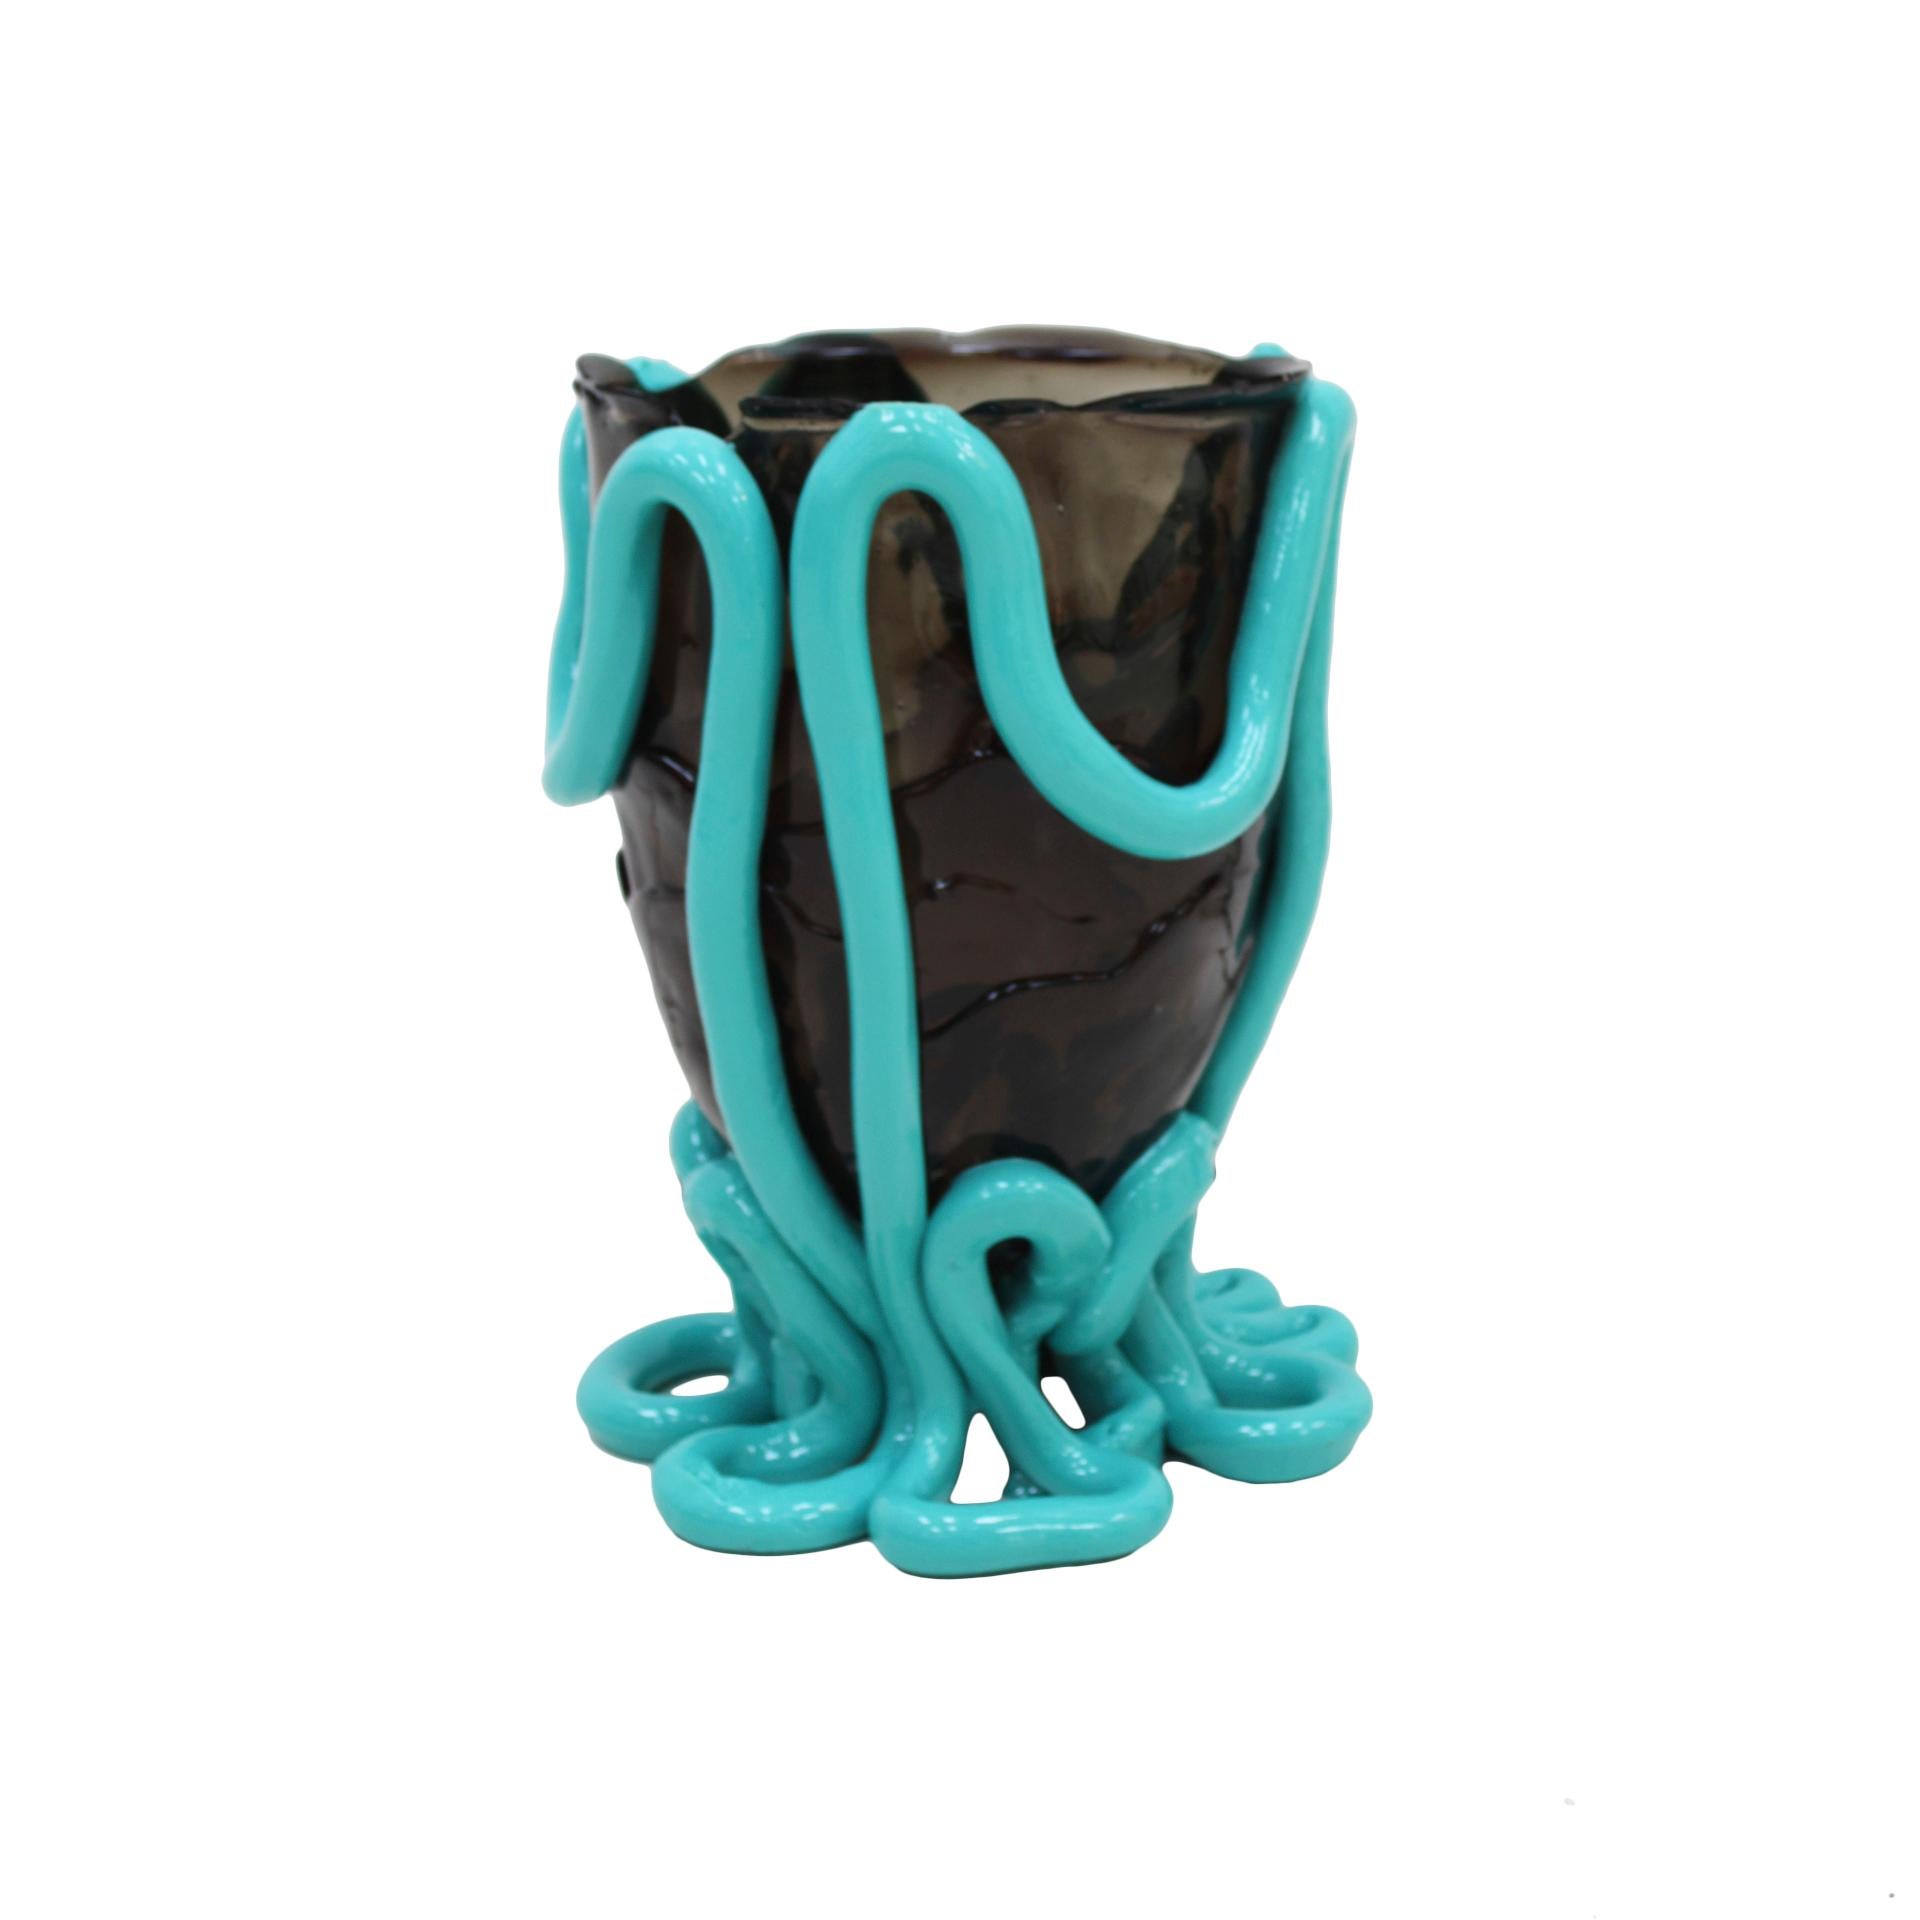 Contemporary vase designed by Gaetano Pesce in 1995 and edited by Fish design. Made in fumé blue and matt turquoise resin. Unique piece. Italy

Measurements: Diameter 22cm x H 36cm

 

Bibliography

Pabellón Rosa. Gaetano Pesce. Catálogo de la